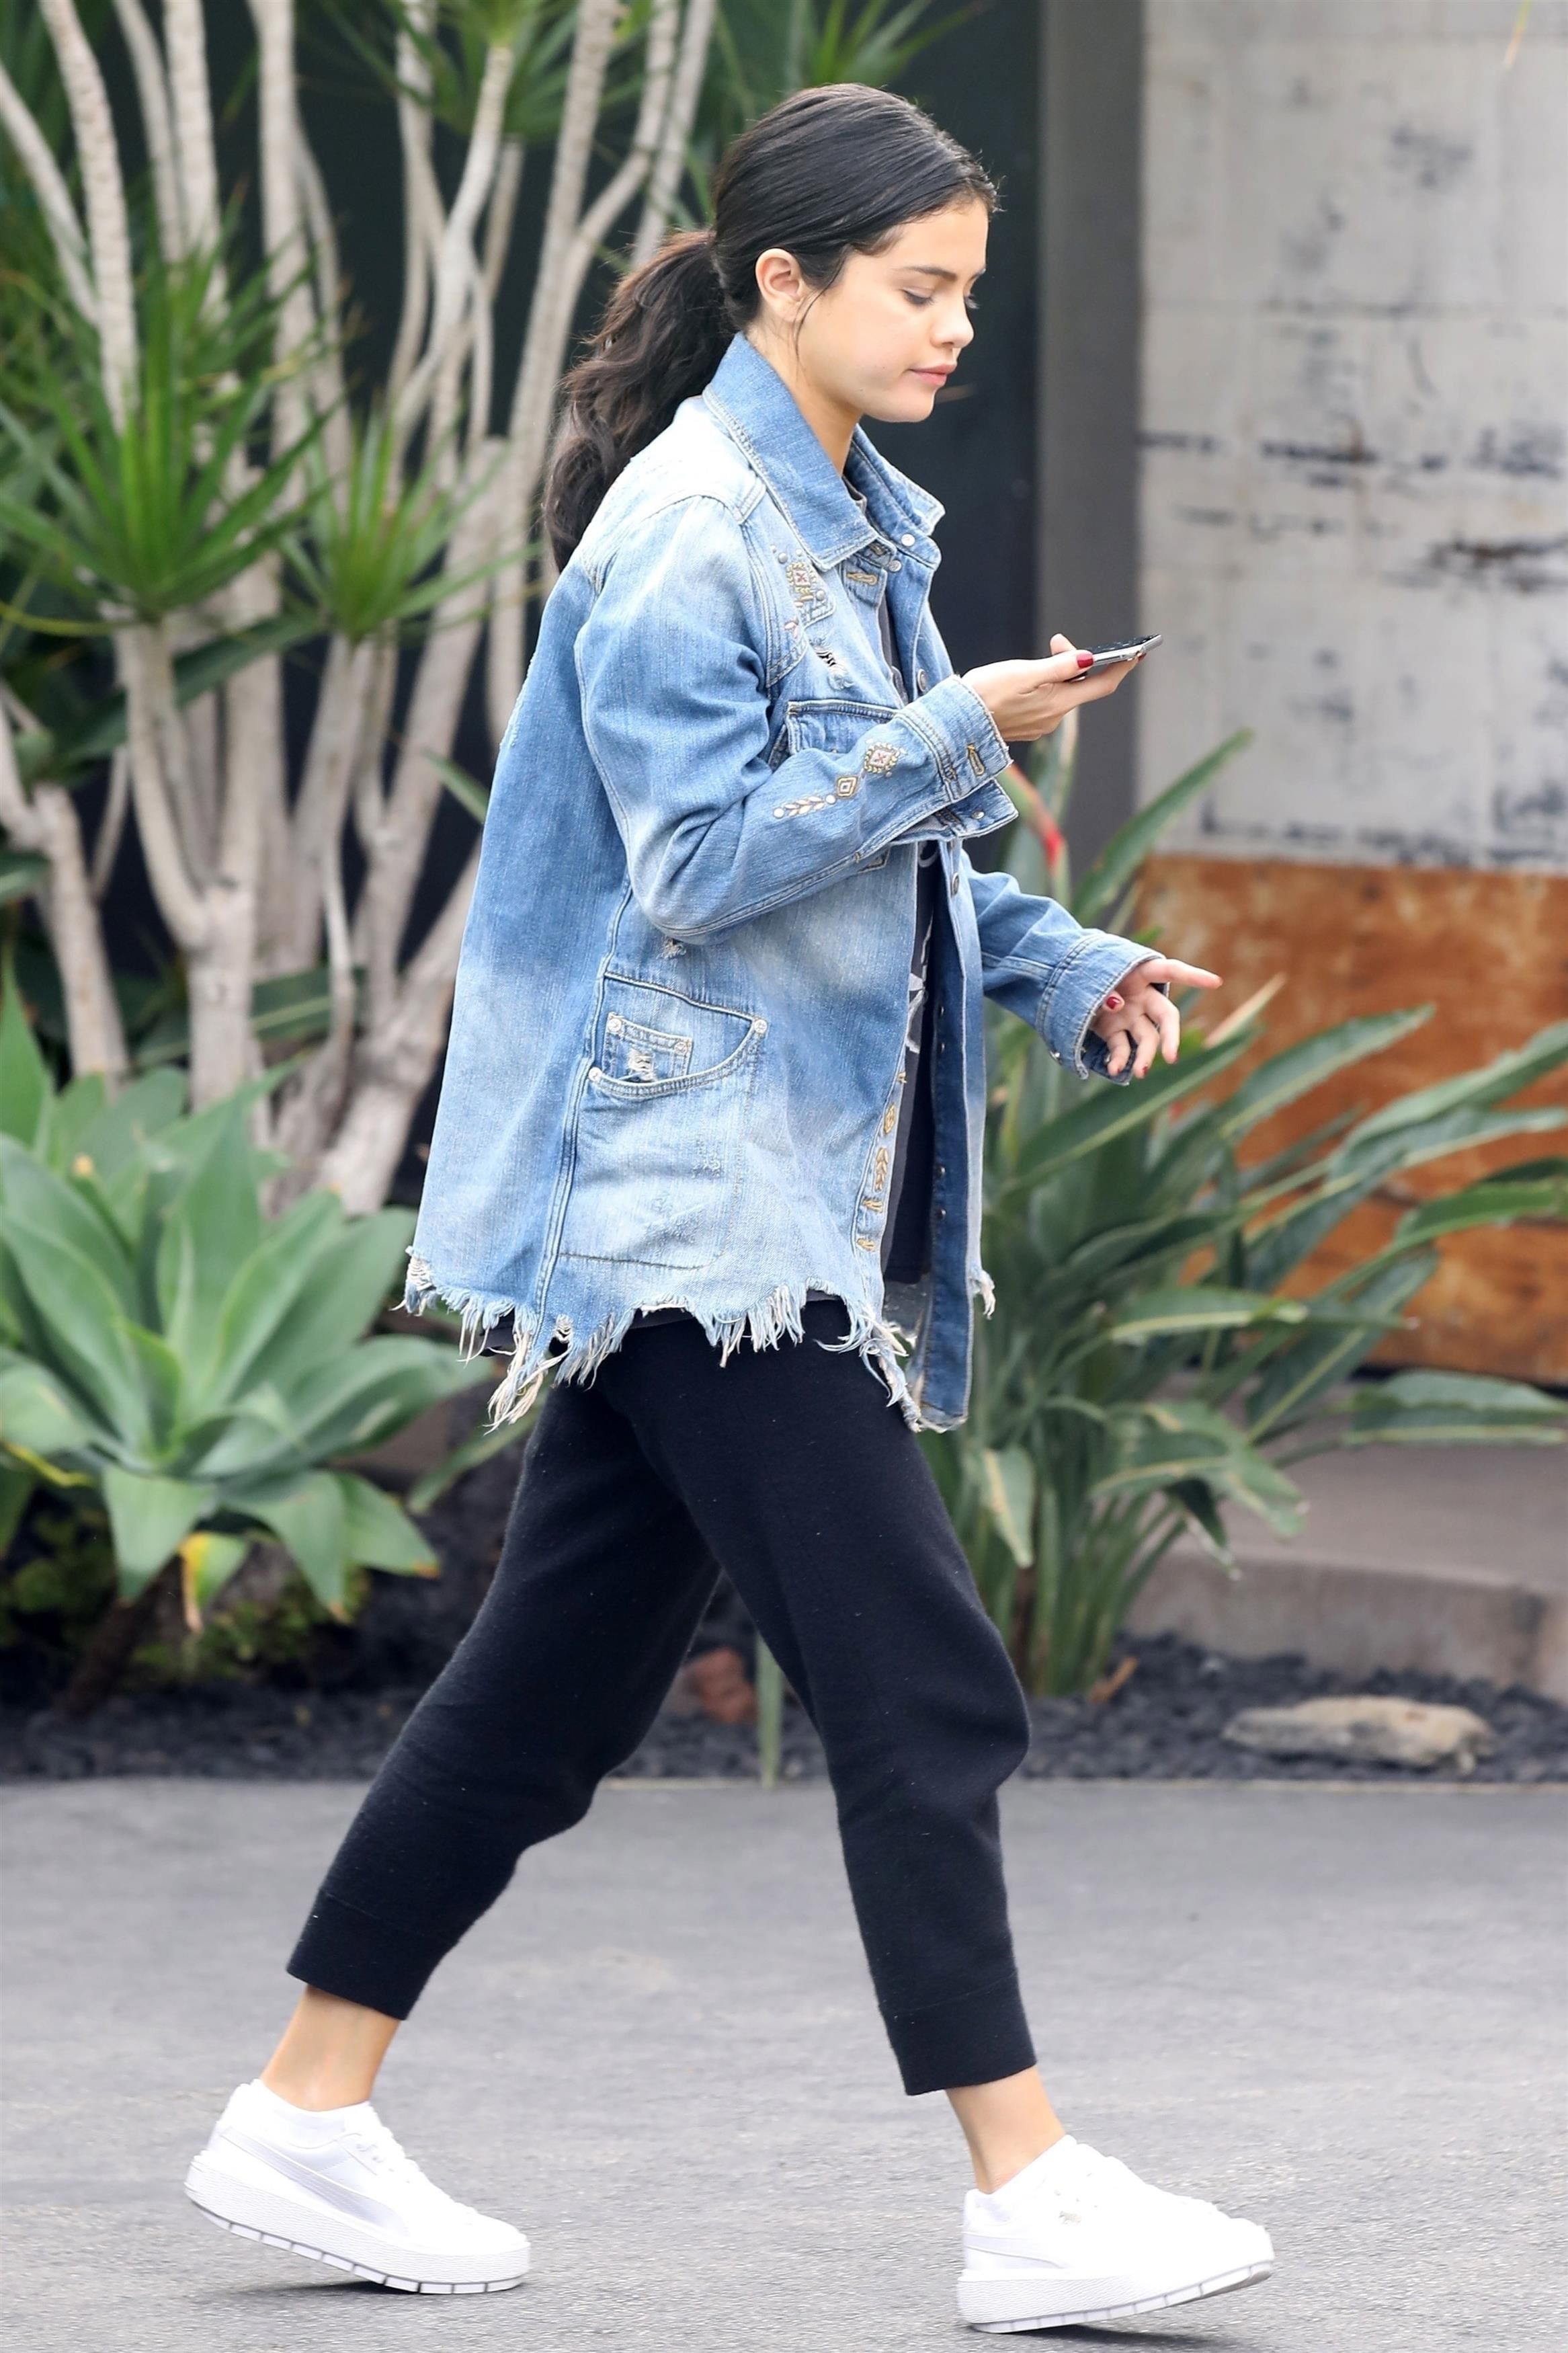 How to Wear a Jean Jacket With Black Leggings - Emma